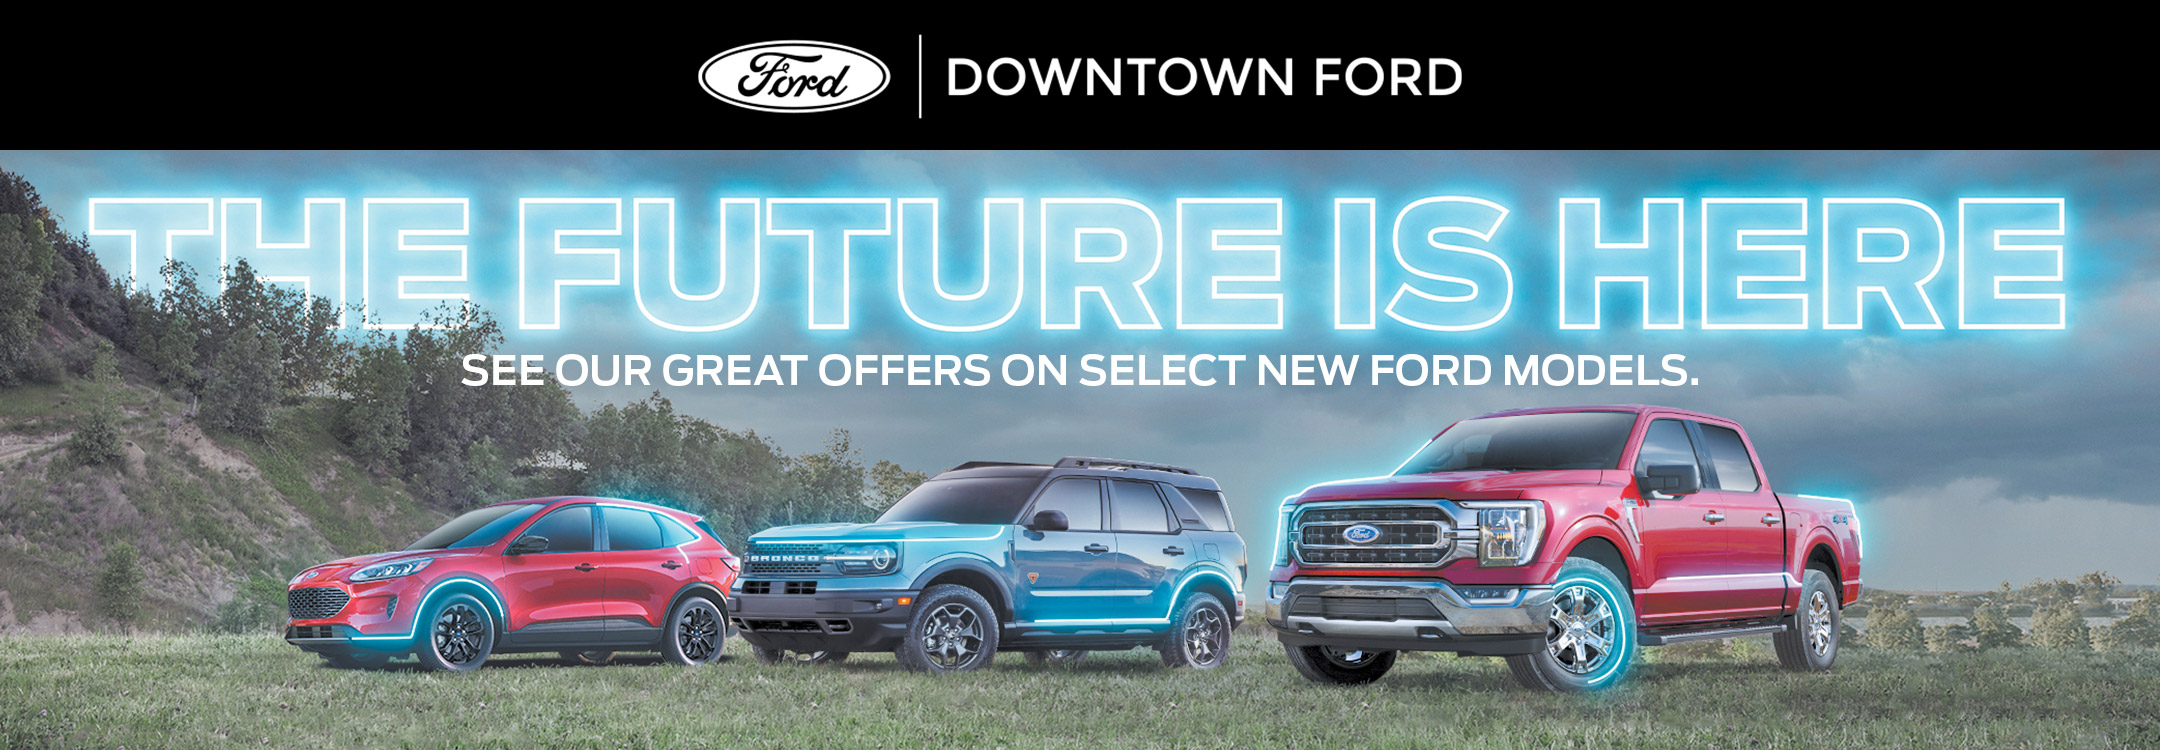 Special Offers at Downtown Ford in Toronto, ON